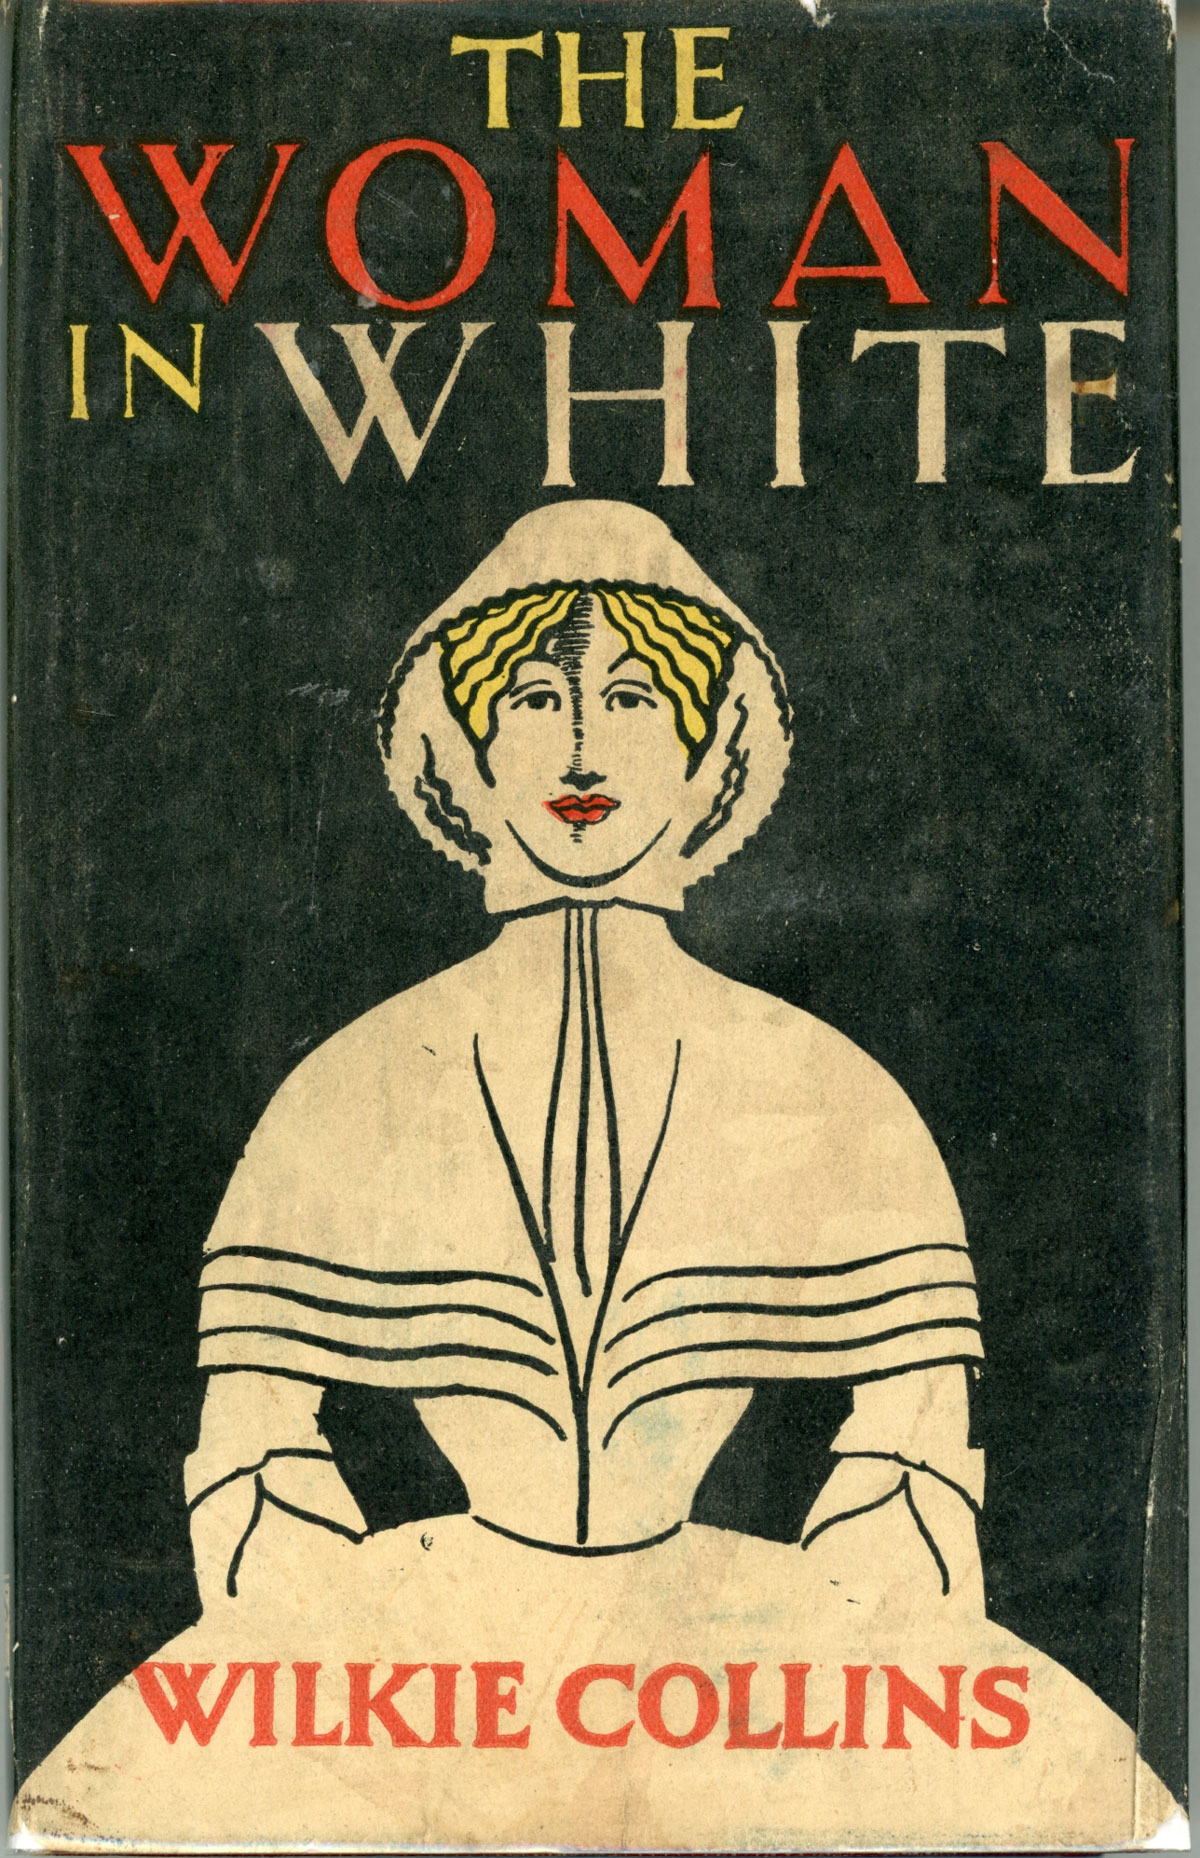 Wilkie Collins – The Lady in White